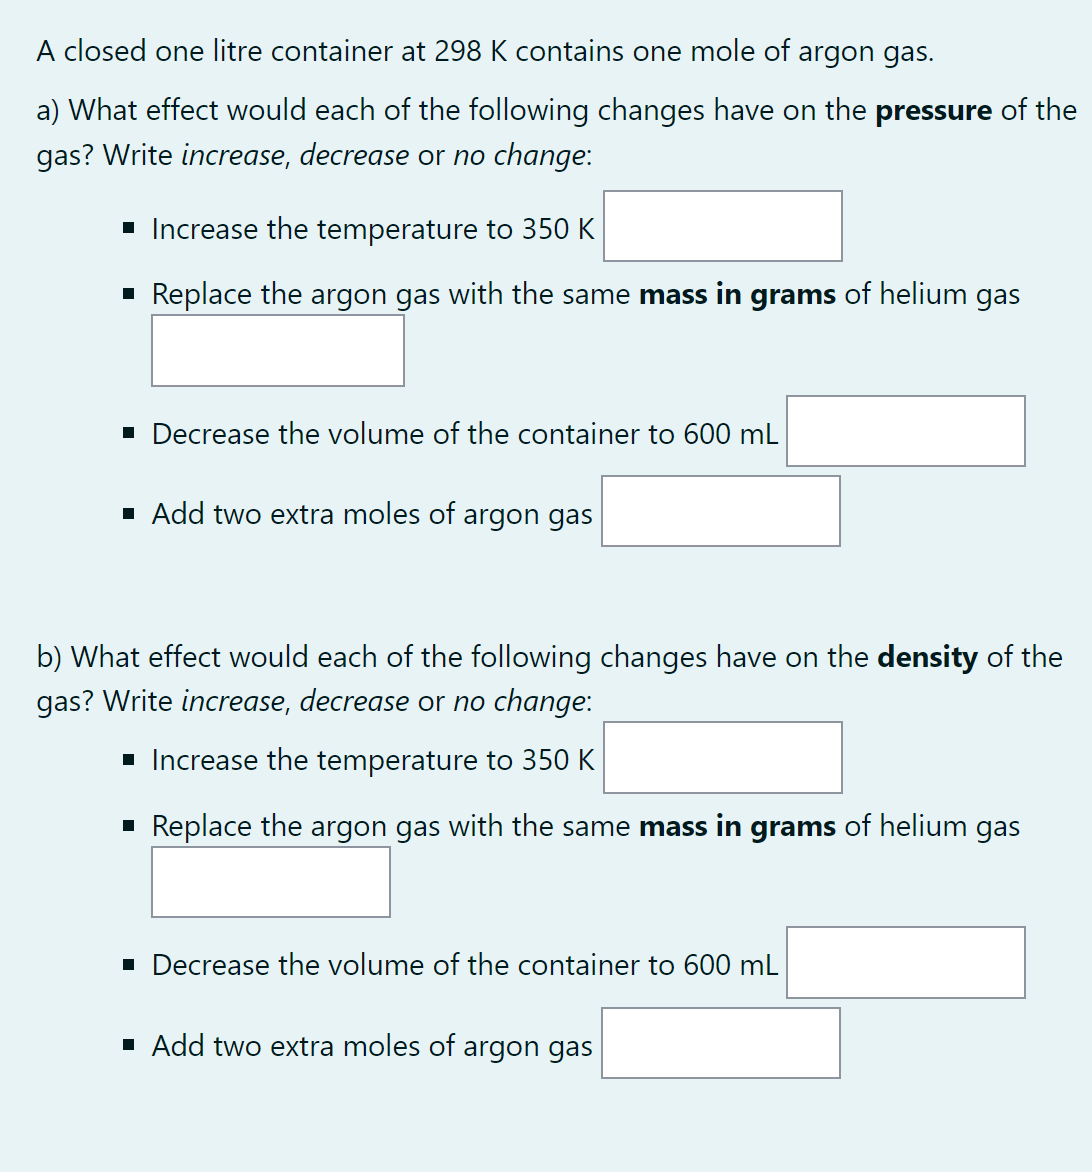 A closed one litre container at 298 K contains one mole of argon gas.
a) What effect would each of the following changes have on the pressure of the
gas? Write increase, decrease or no change:
■ Increase the temperature to 350 K
▪ Replace the argon gas with the same mass in grams of helium gas
▪ Decrease the volume of the container to 600 mL
▪ Add two extra moles of argon gas
b) What effect would each of the following changes have on the density of the
gas? Write increase, decrease or no change:
■ Increase the temperature to 350 K
▪ Replace the argon gas with the same mass in grams of helium gas
■ Decrease the volume of the container to 600 mL
▪ Add two extra moles of argon gas